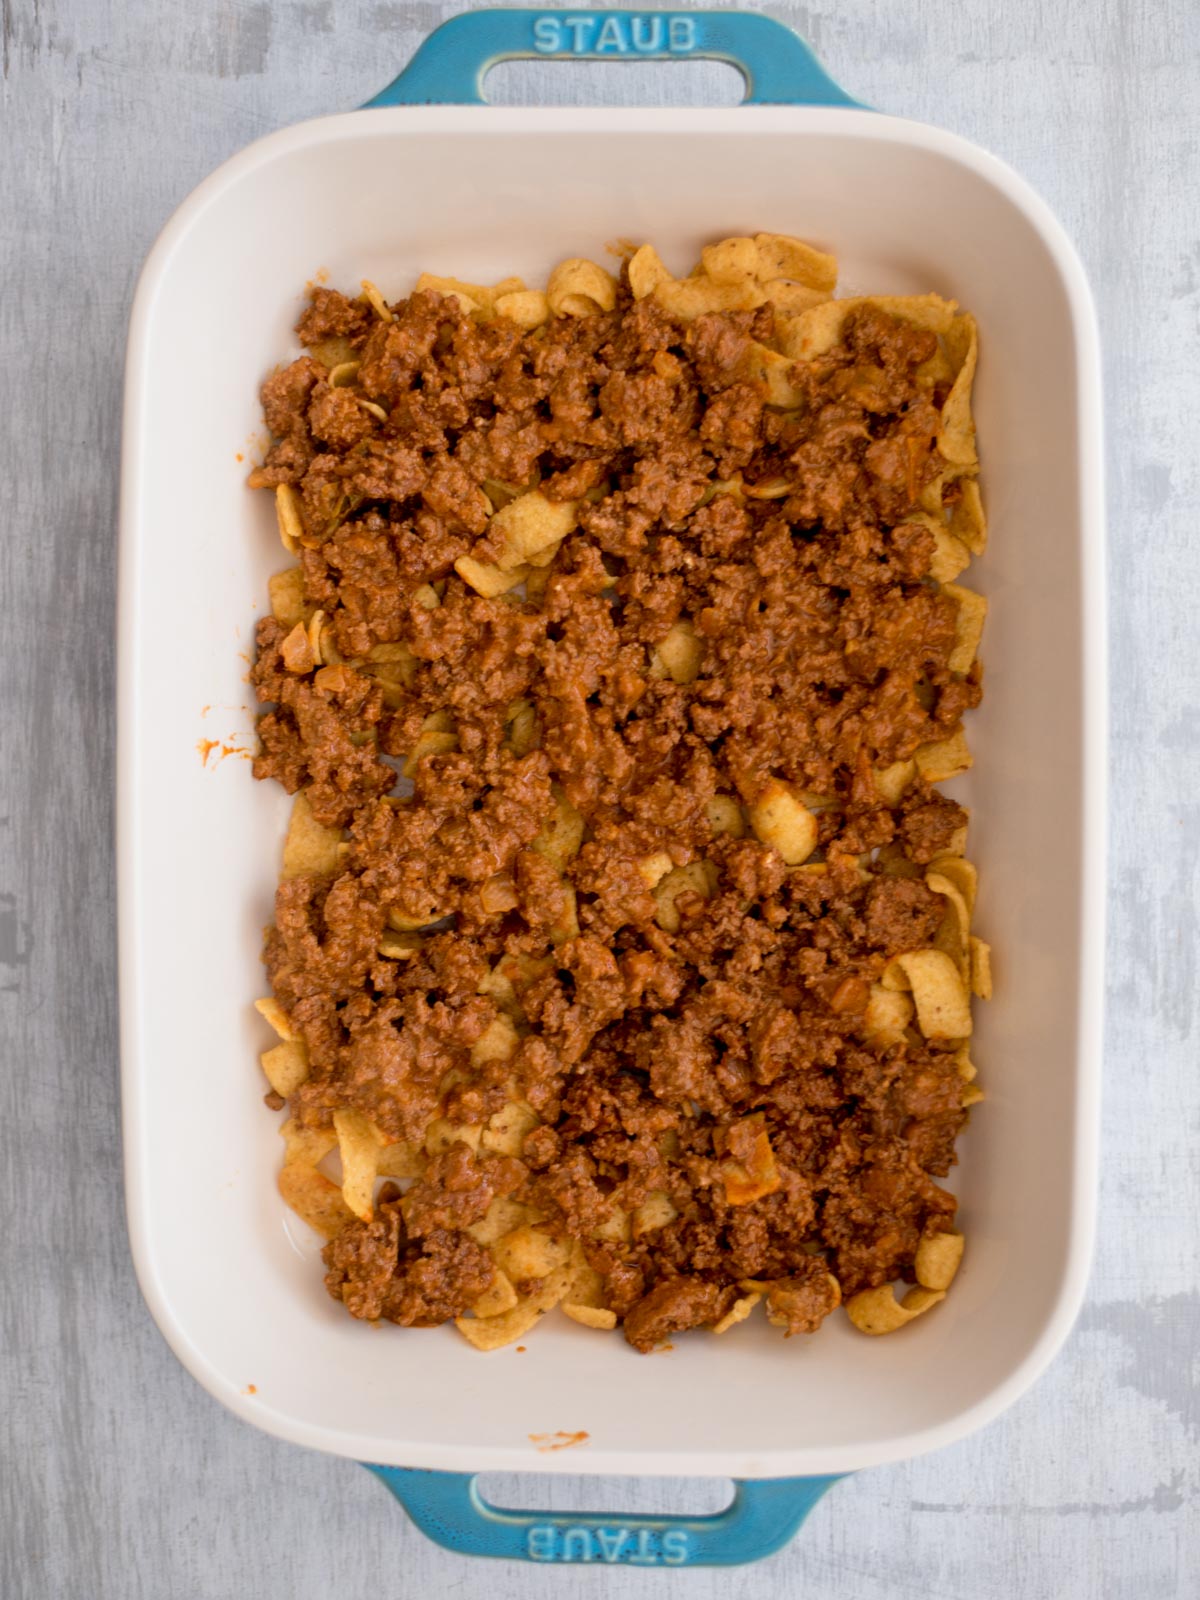 Baking dish with fritos and seasoned meat topping it.